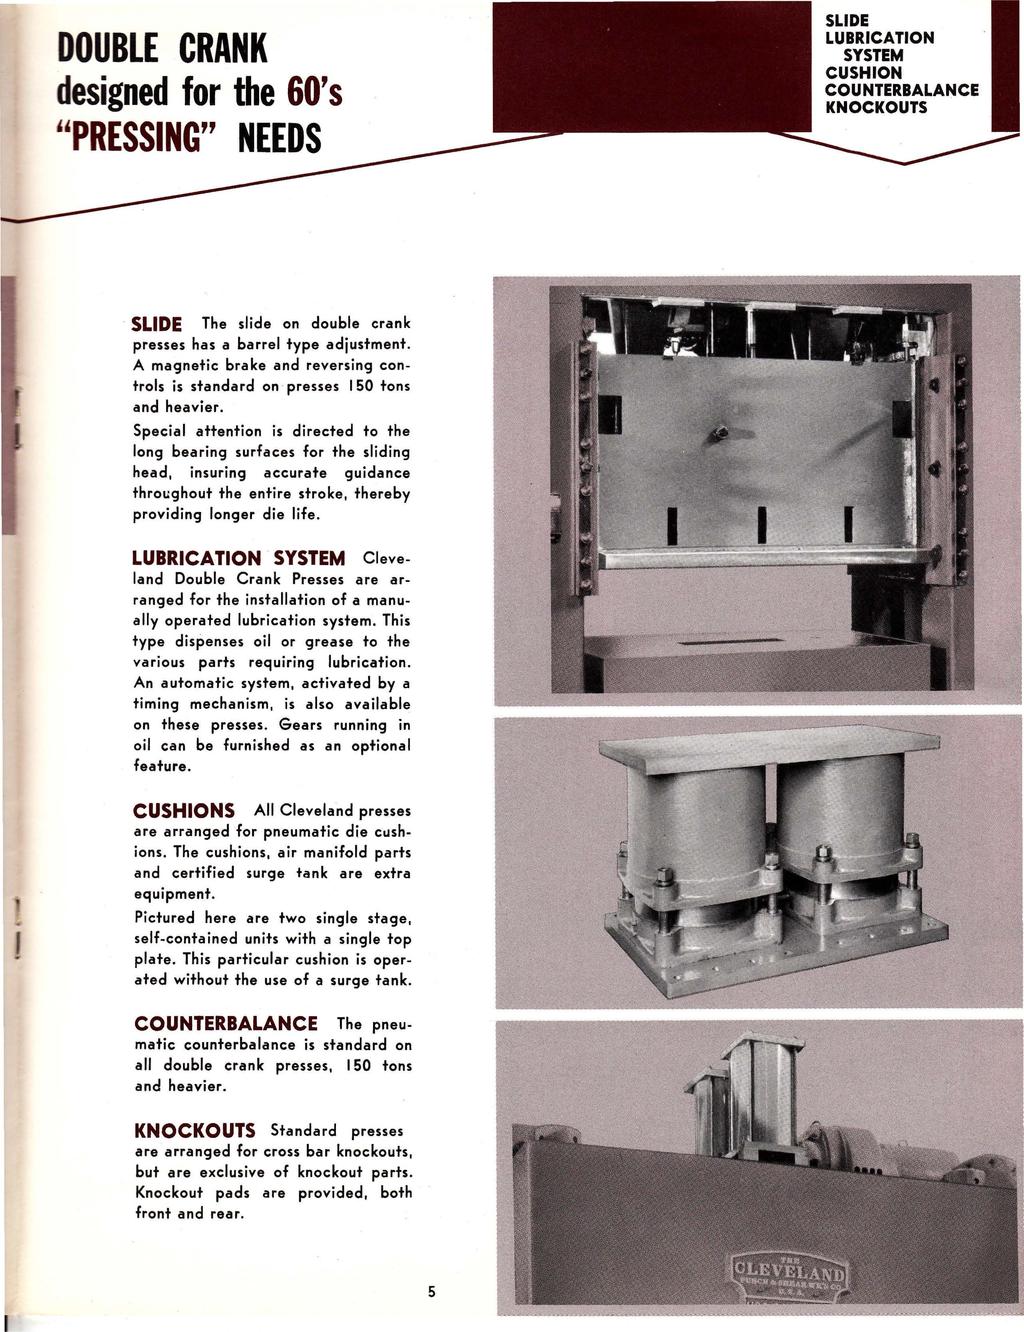 LUBRICATION SYSTEM CUSHION COUNTERBALANCE KNOCKOUTS DOUBLE CRANK designed for the 60's ''PRESSING" NEEDS The slide on double crank presses has a barrel type adjustment.